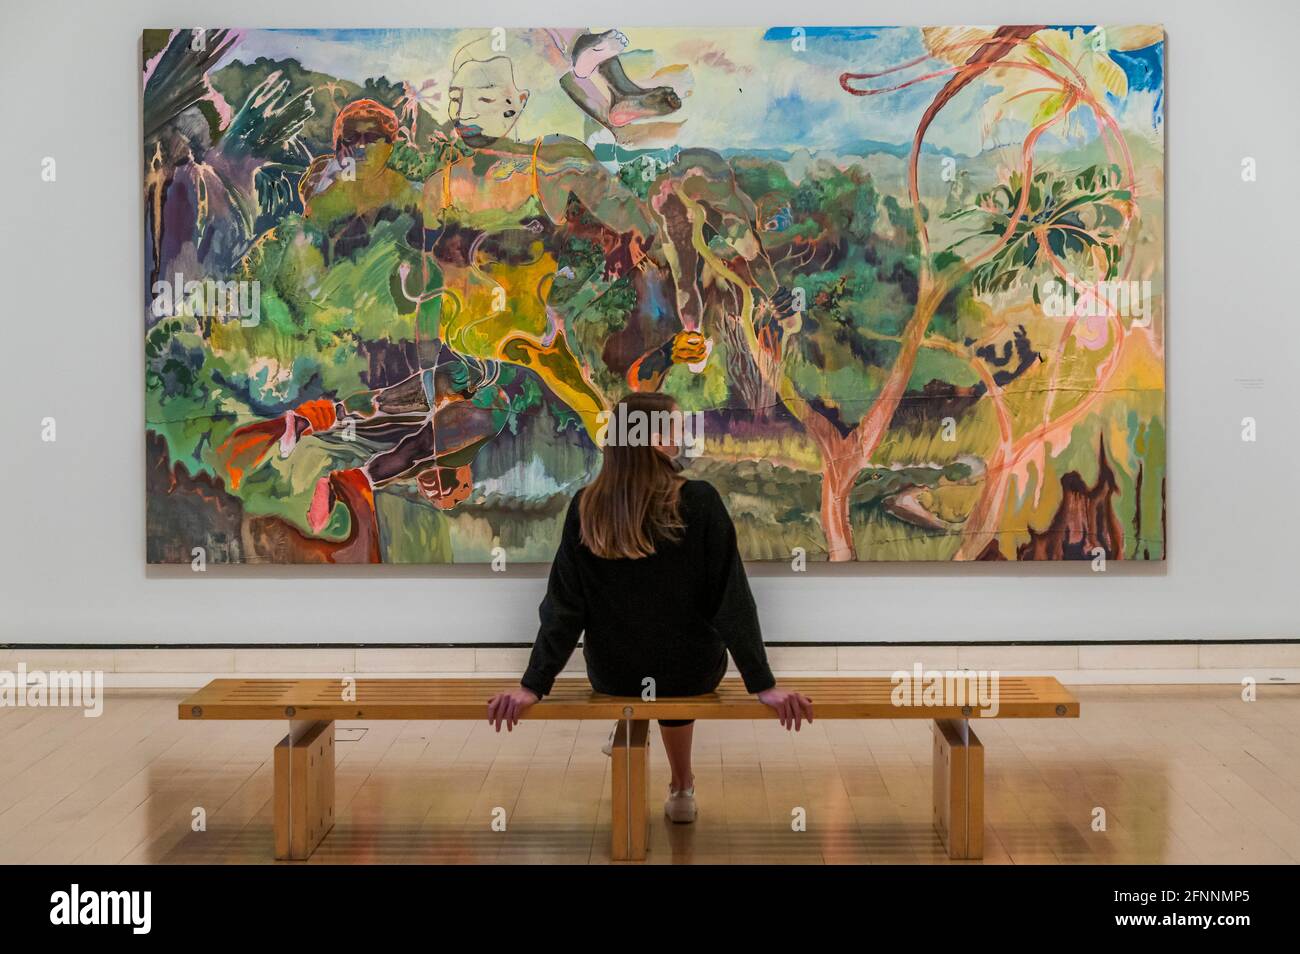 London, UK. 18th May, 2021. The Paradise Effect, 2019 - Michael Armitage: Paradise Edict at the Royal Academy - he reflects on his experiences in Kenya and on current events, while drawing on contemporary East African art and European art history. The exhibition spans the last seven years of Armitage's work, featuring landscapes, allegorical figures and paintings inspired by the 2017 Kenyan general elections. The RA reopens its London spaces after easing of the restrictions of the third Coronavirus Lockdown. Credit: Guy Bell/Alamy Live News Stock Photo